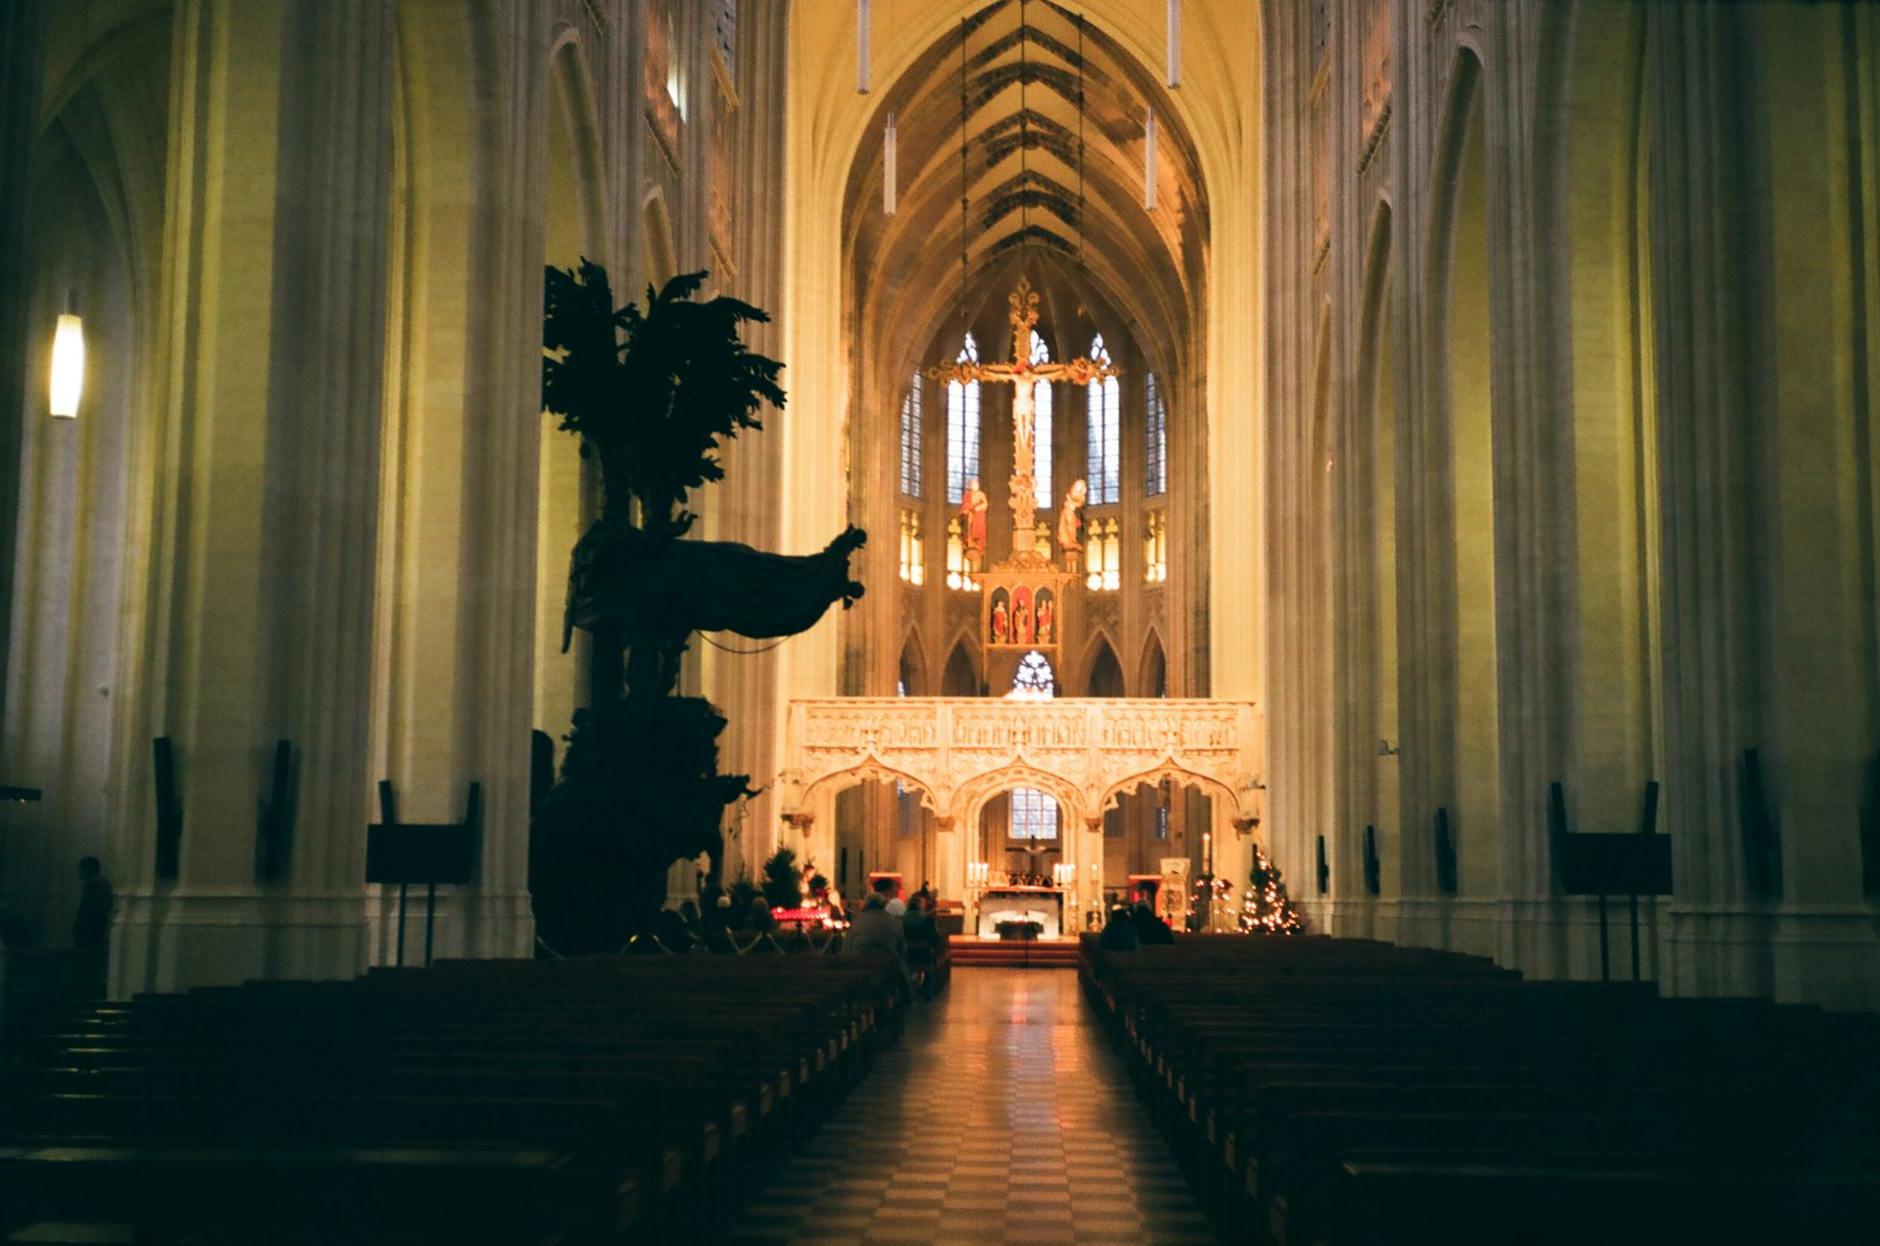 Interior of catholic cathedral with benches and ornamental arches